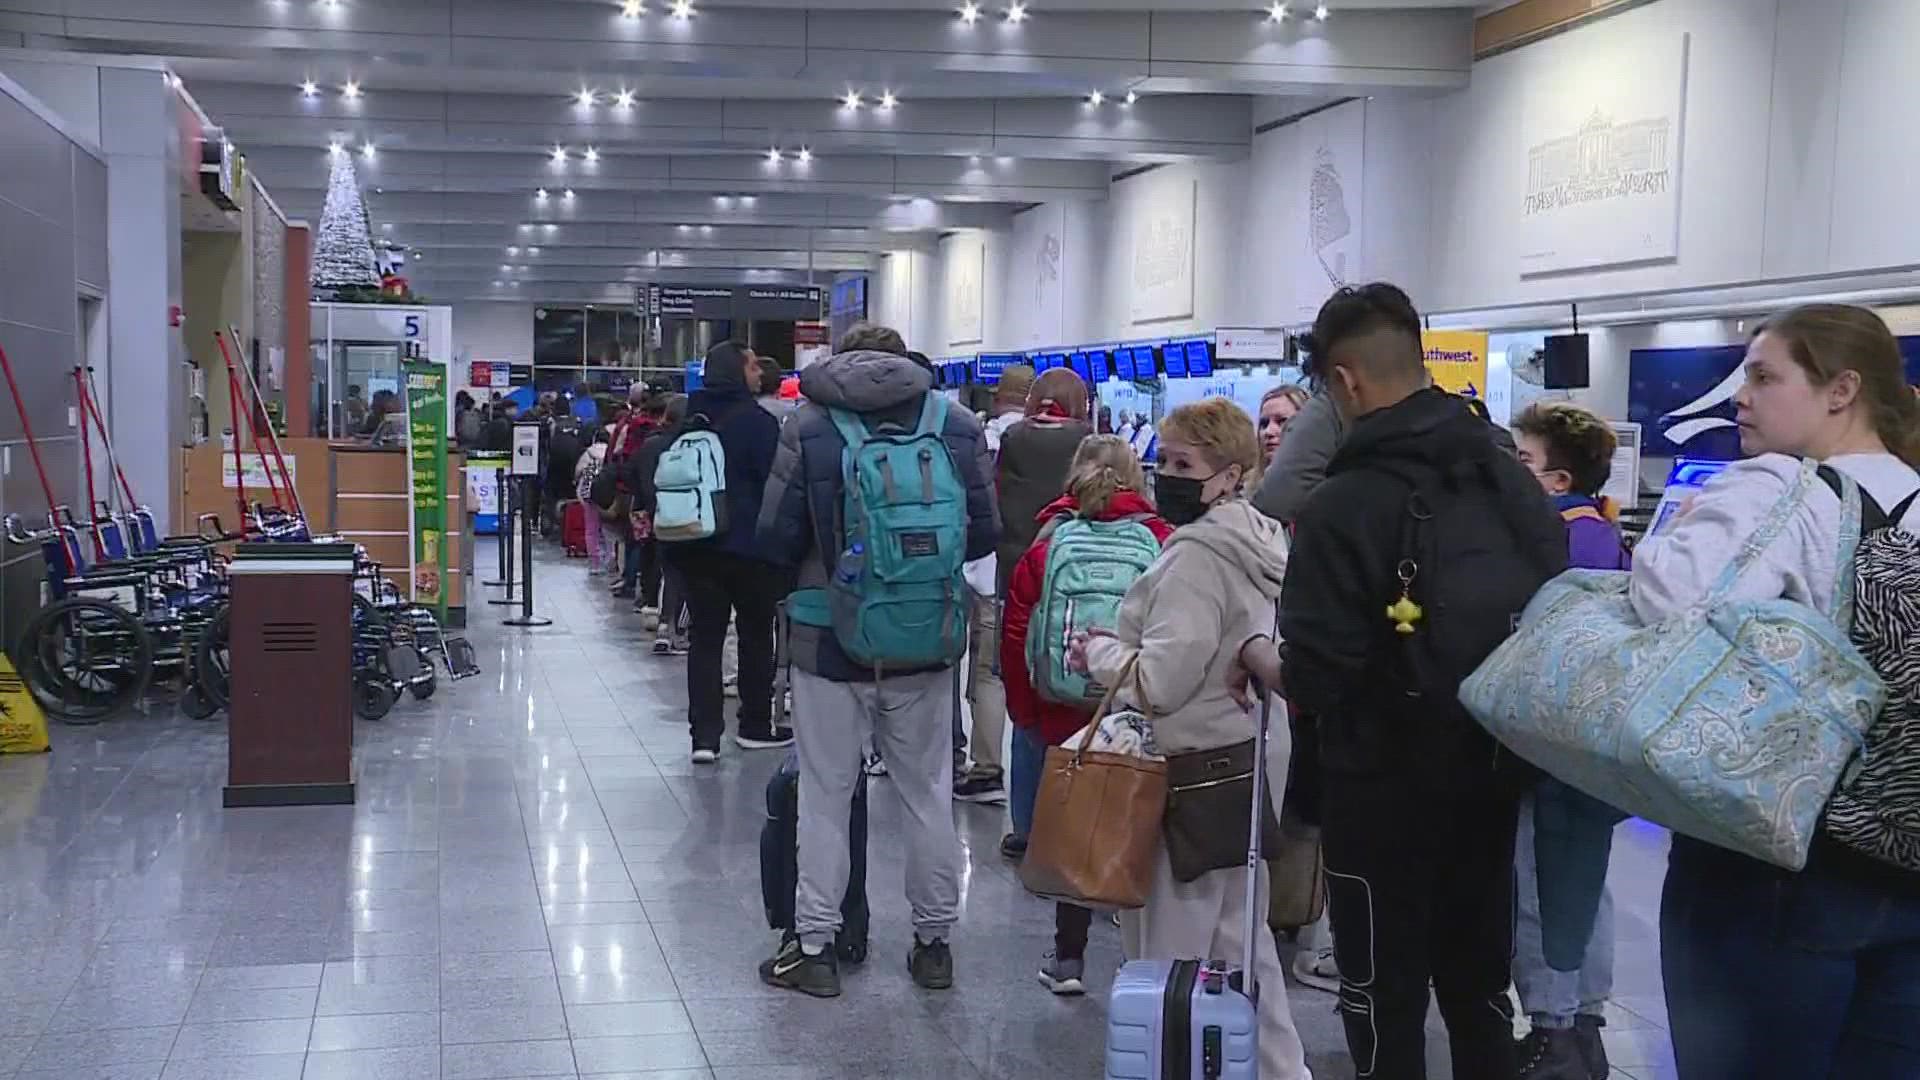 Here's a look at the lines at Cleveland Hopkins International Airport as Thanksgiving travelers take to the skies.